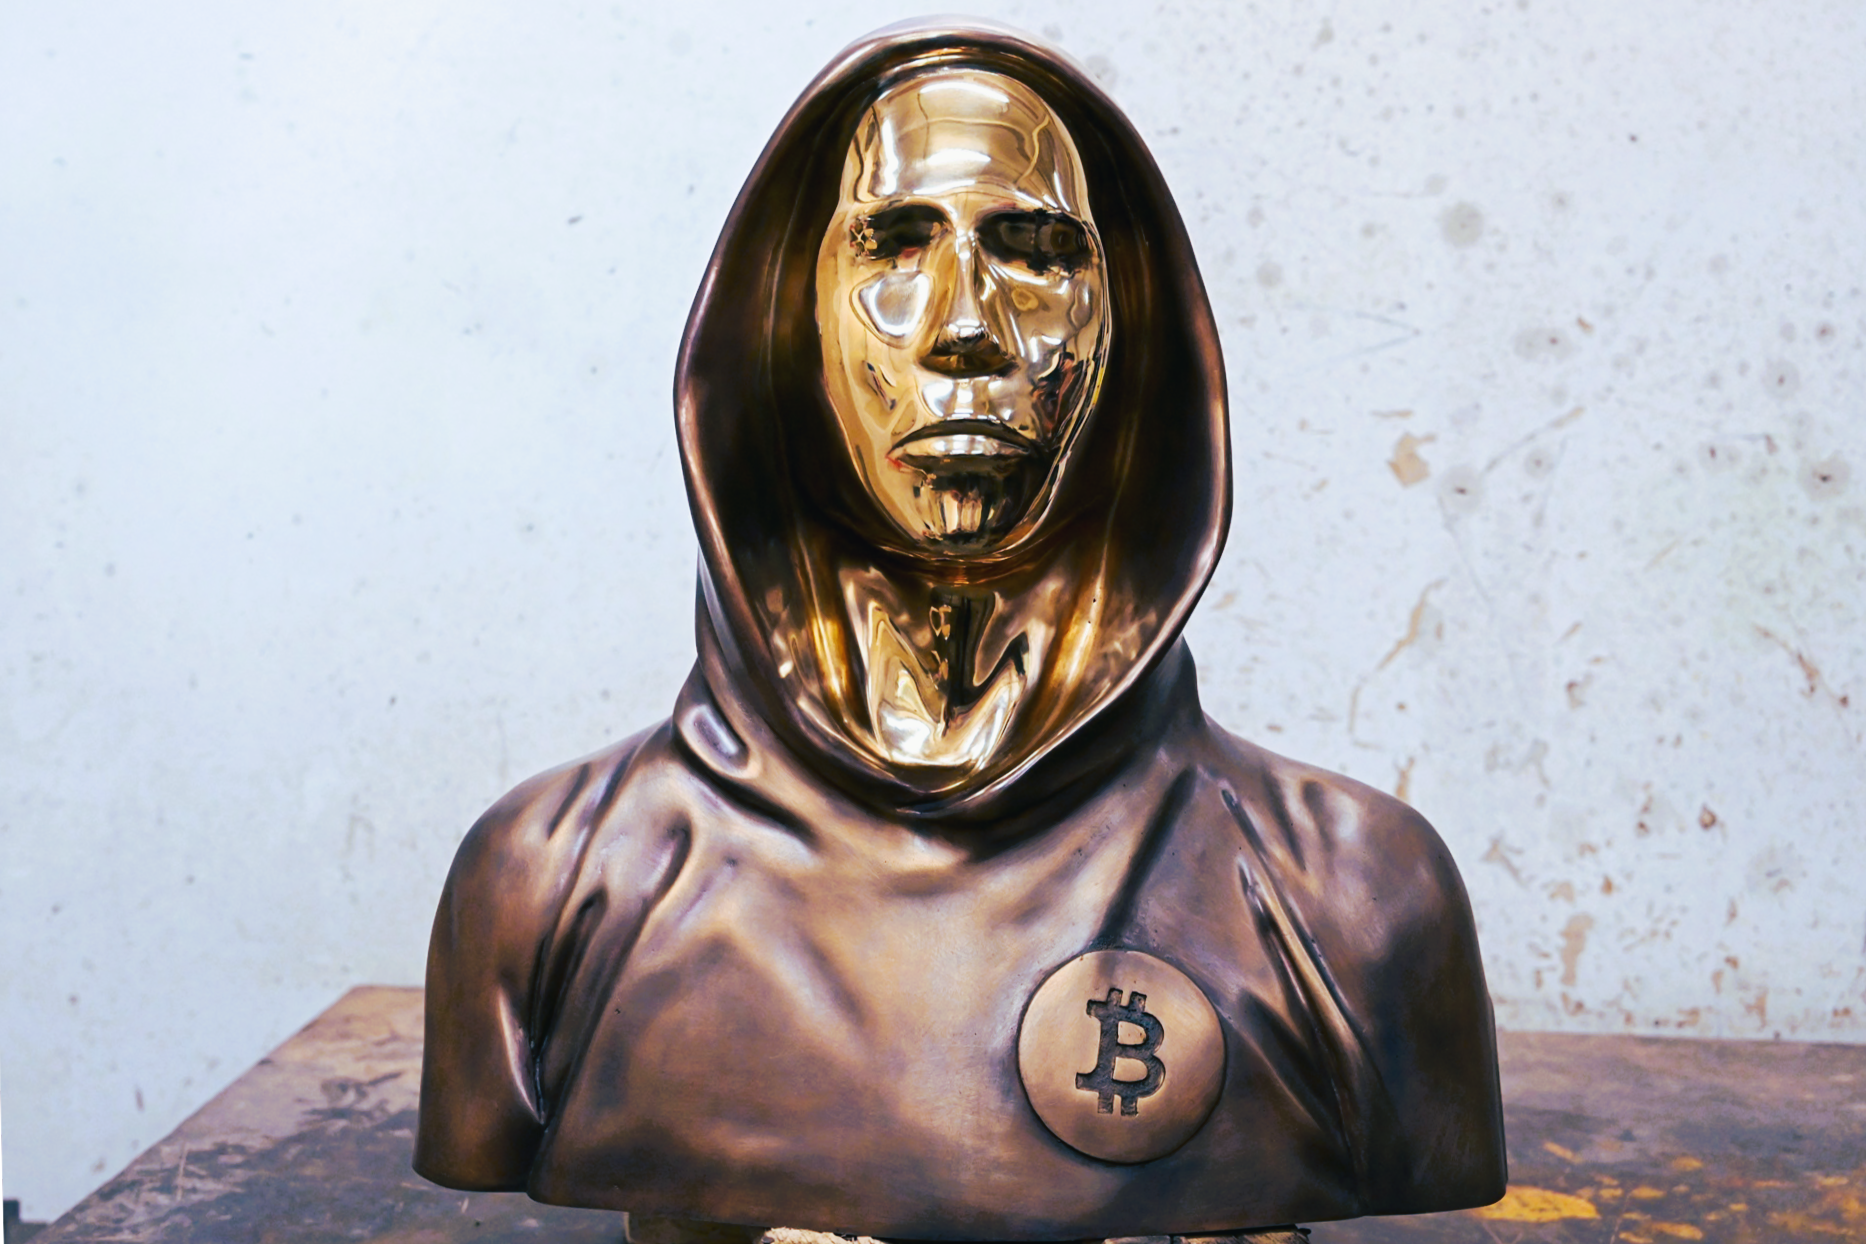 A bronze statue of the mysterious tech figure in the village of Nagytarcsa, east of Budapest